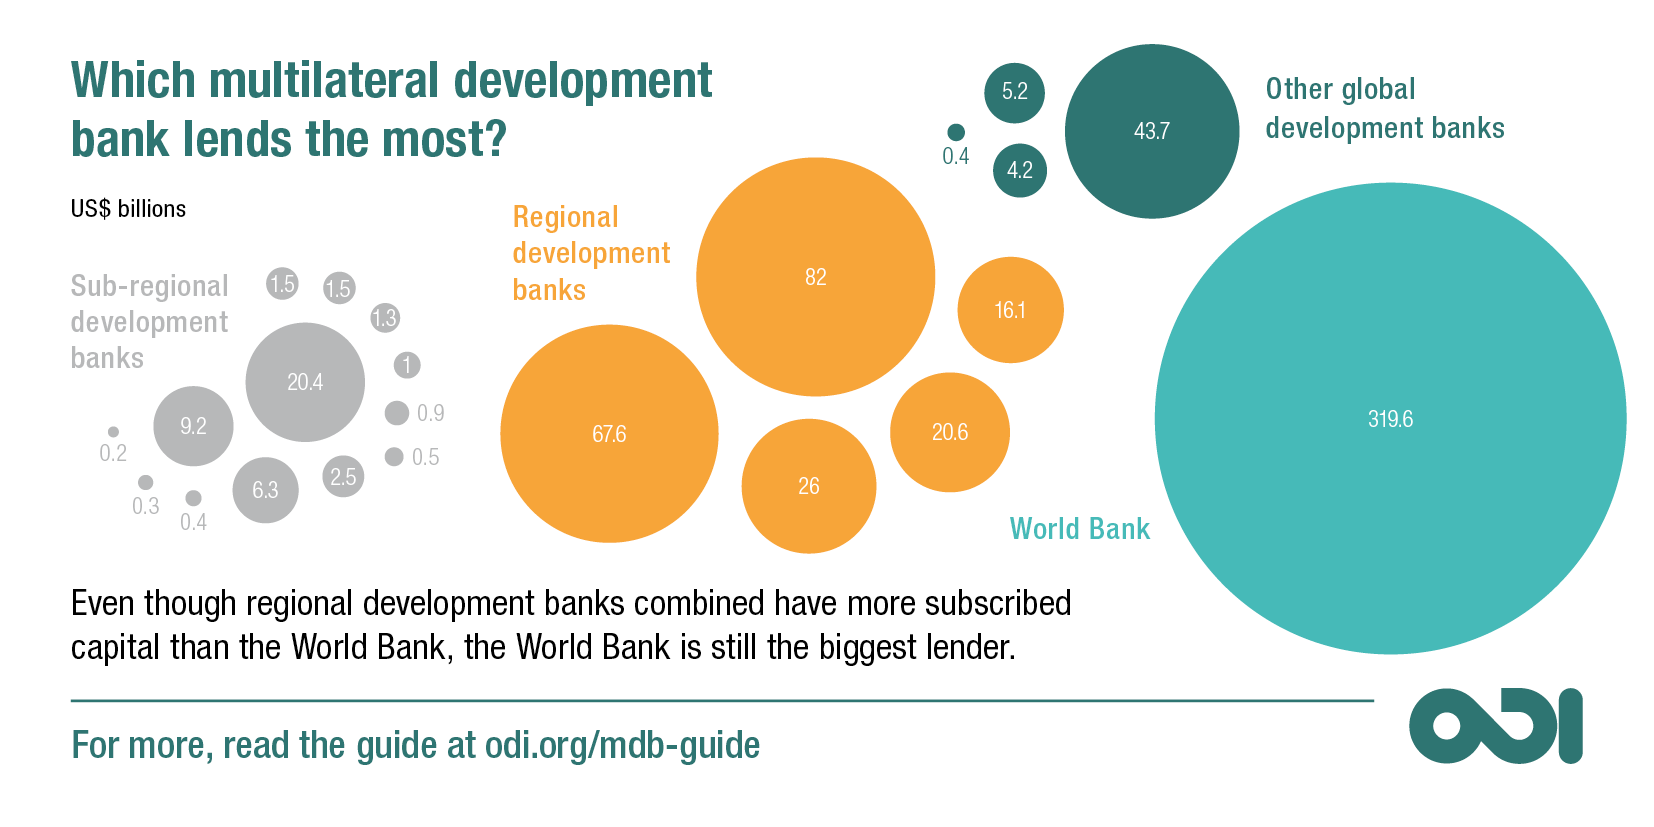 Which multilateral development bank lends the most?